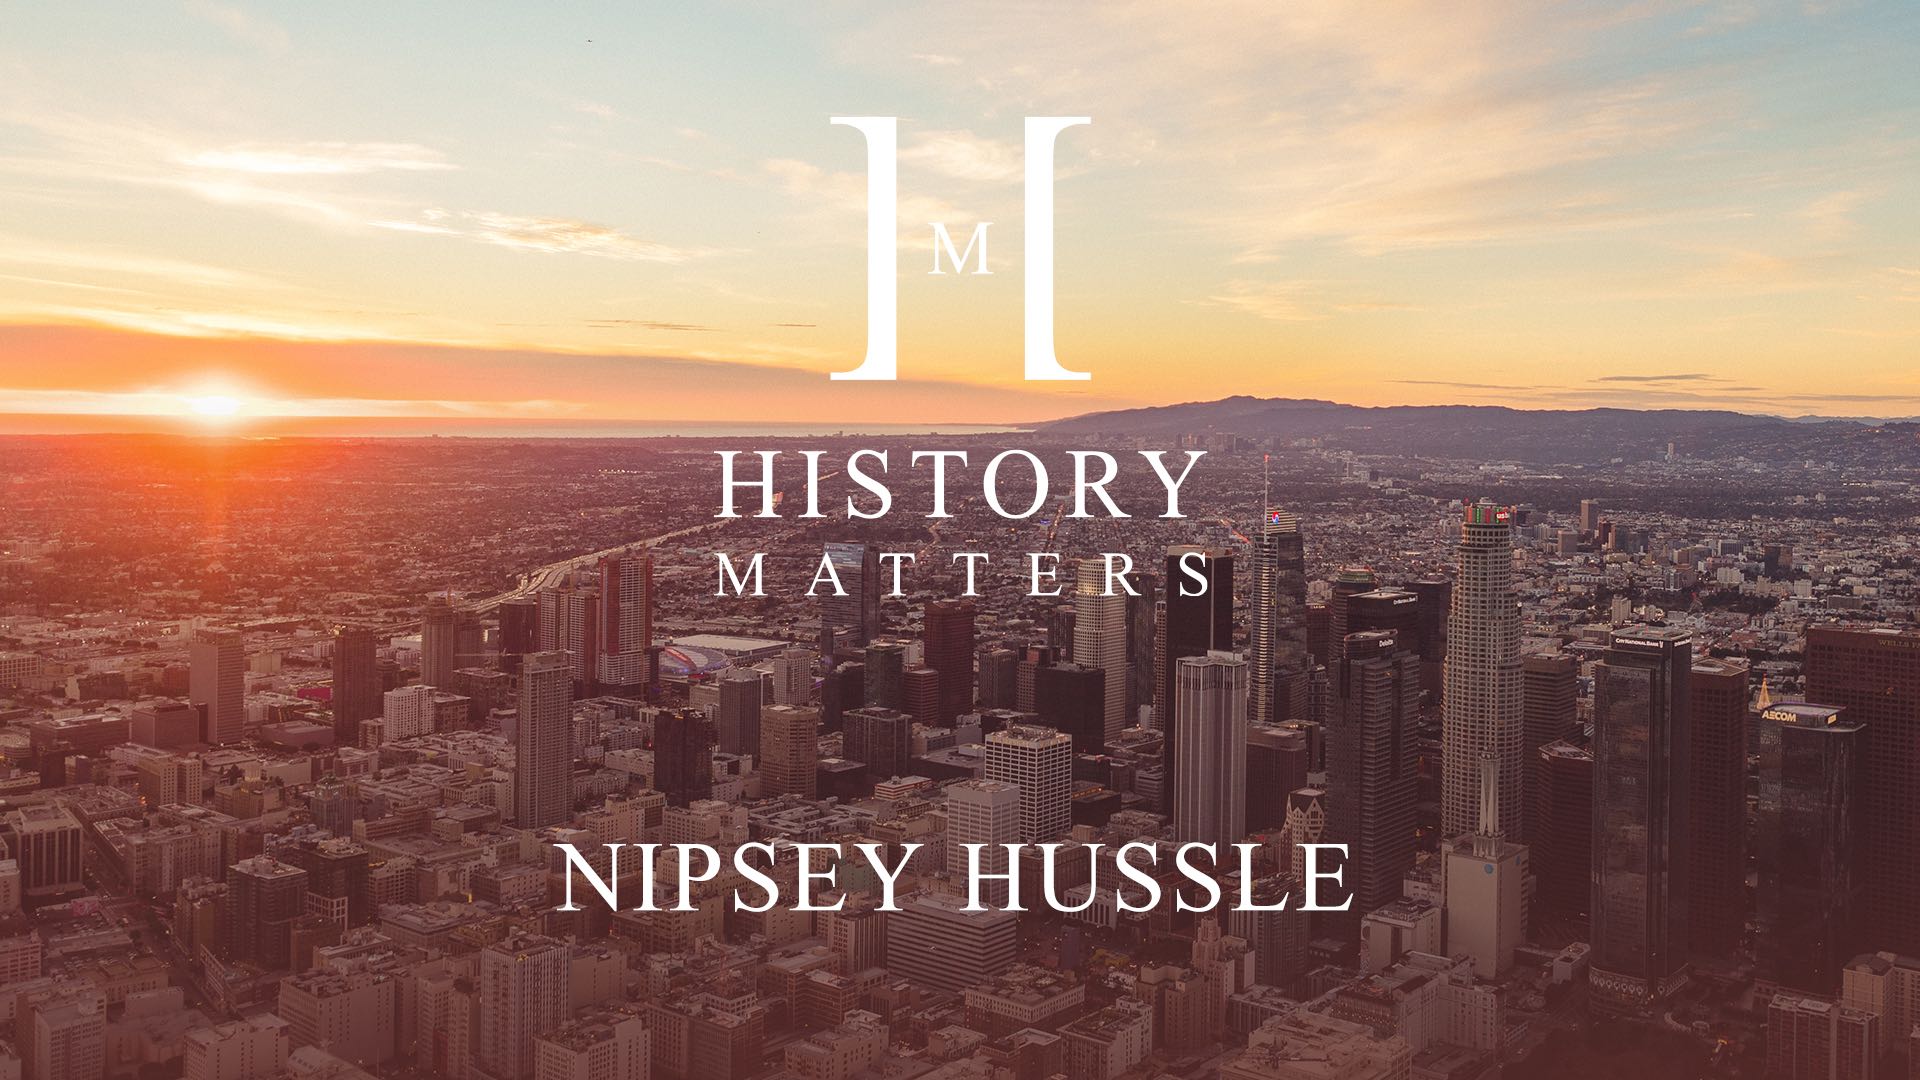 IU C&I Studios Page White HM Nipsey Hussle logo with a background of aerial view of a city at sunrise